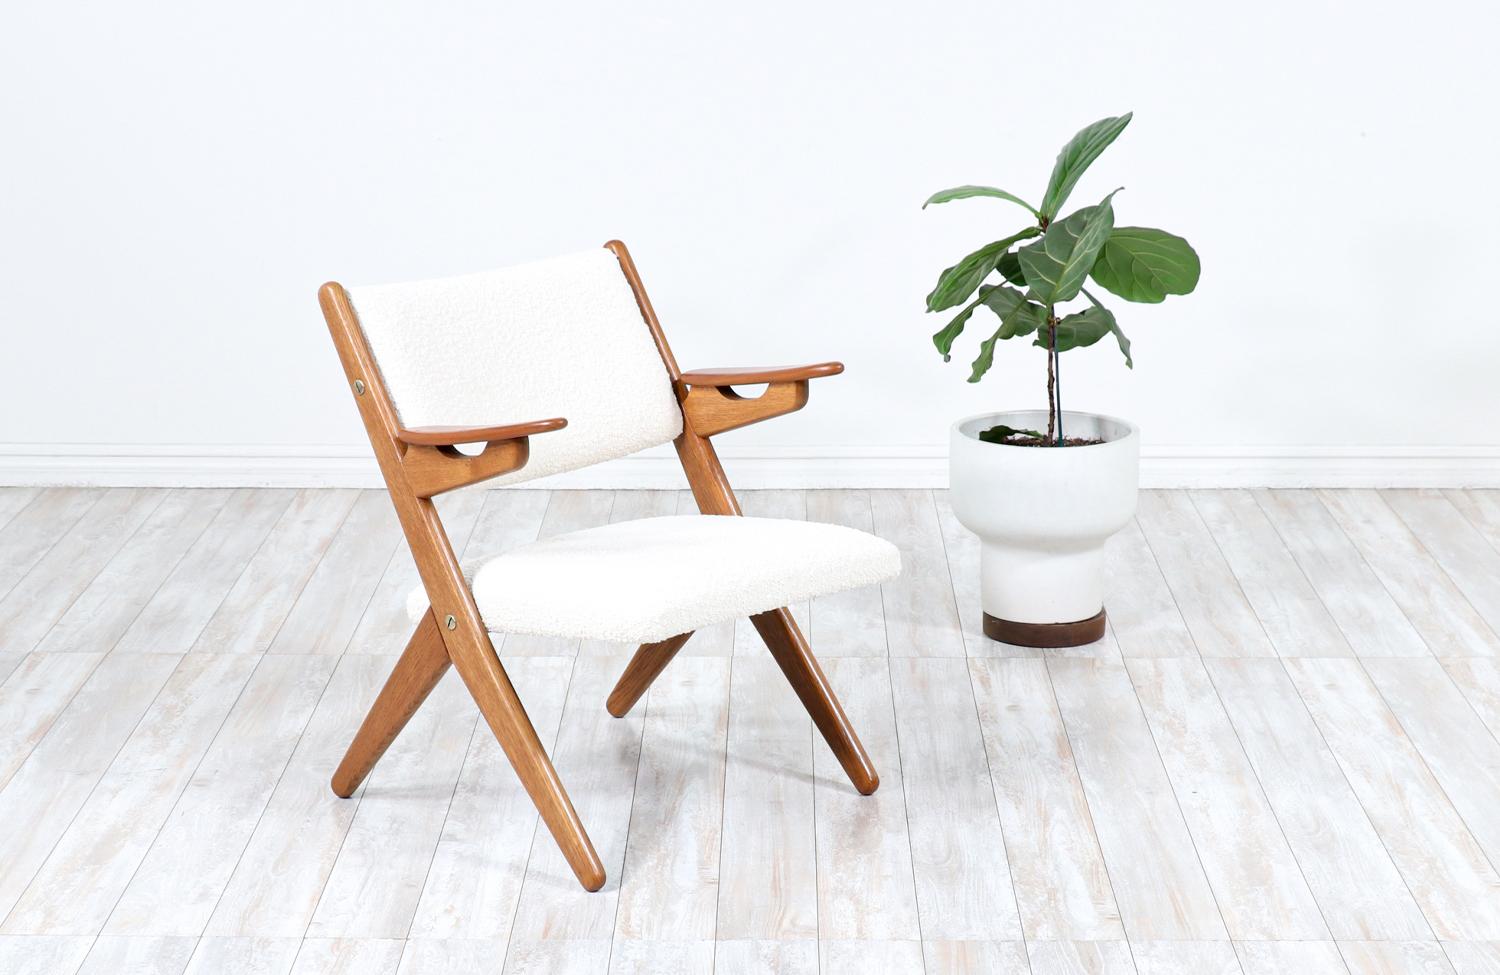 Danish Modern sculpted oak & teak arm chair by Arne-Hovmand Olsen.

________________________________________

Transforming a piece of Mid-Century Modern furniture is like bringing history back to life, and we take this journey with passion and